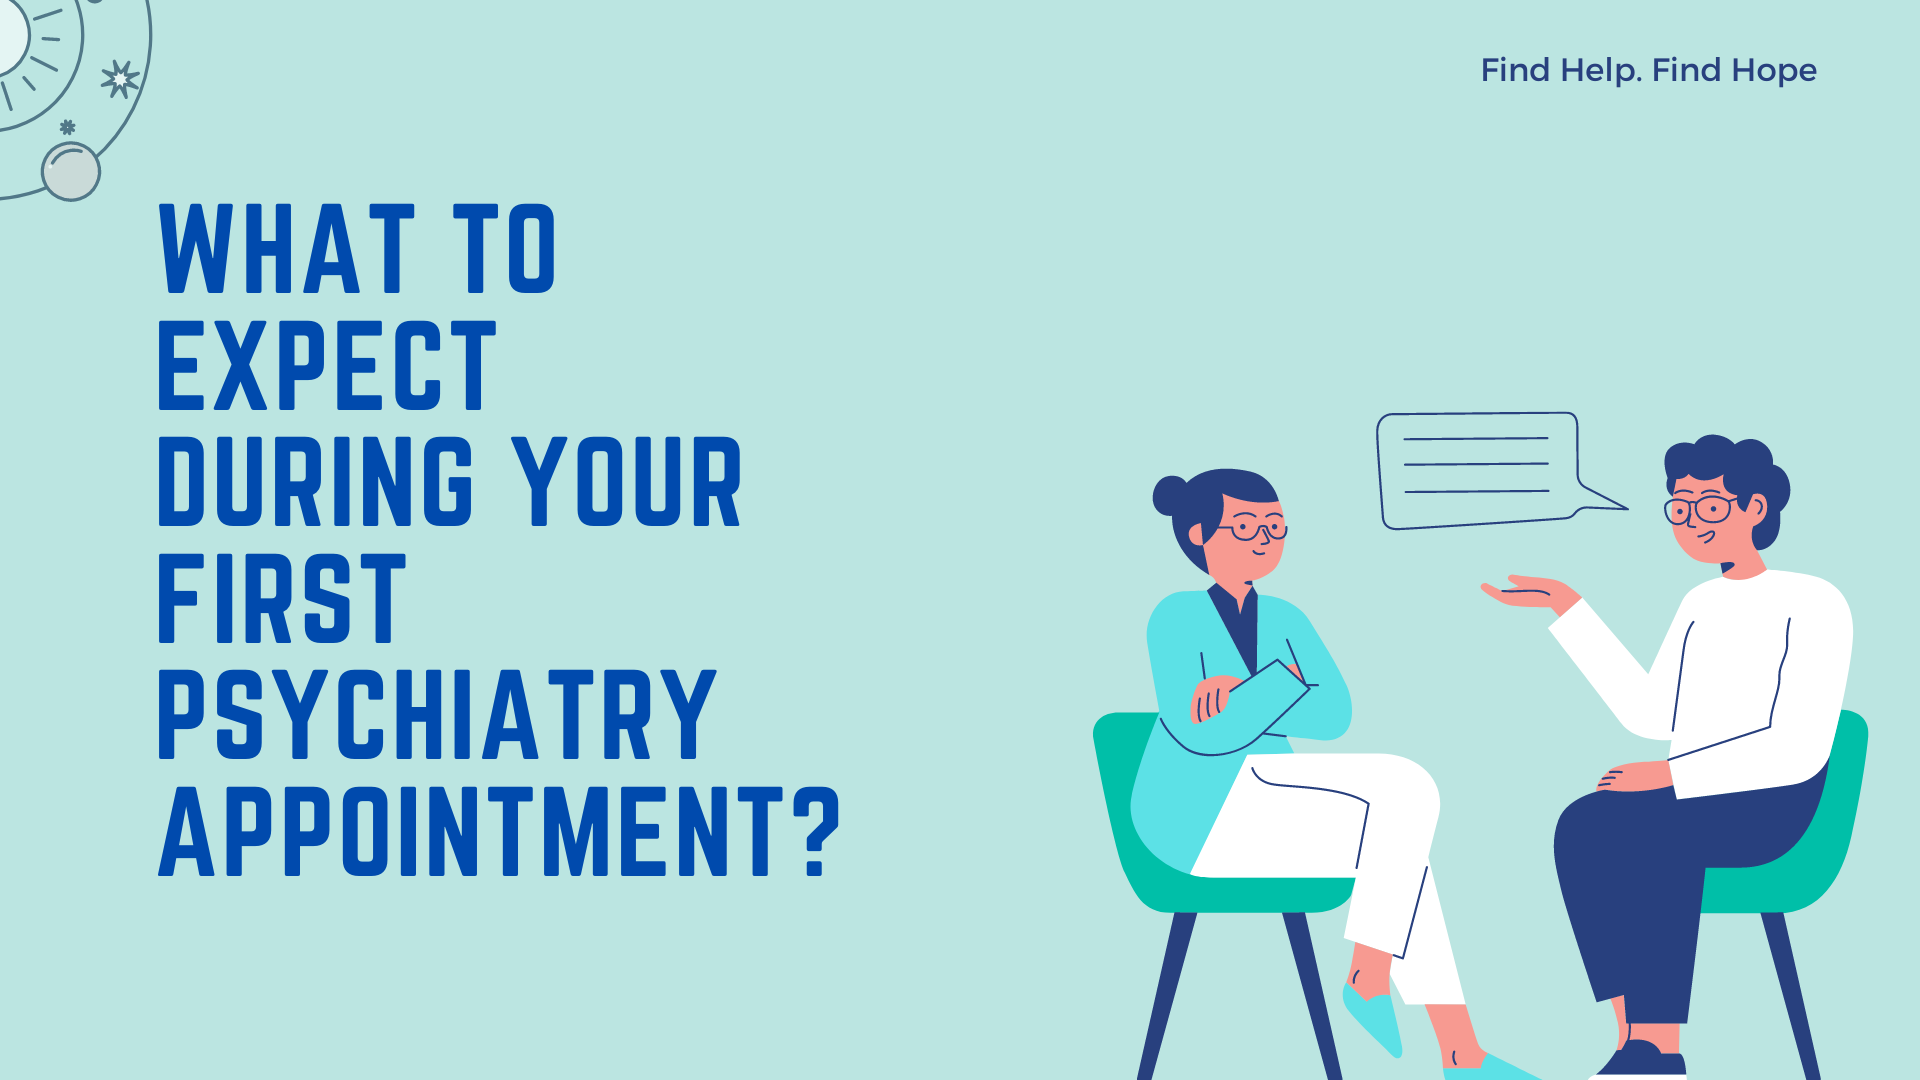 What to Expect During Your First Psychiatry Appointment